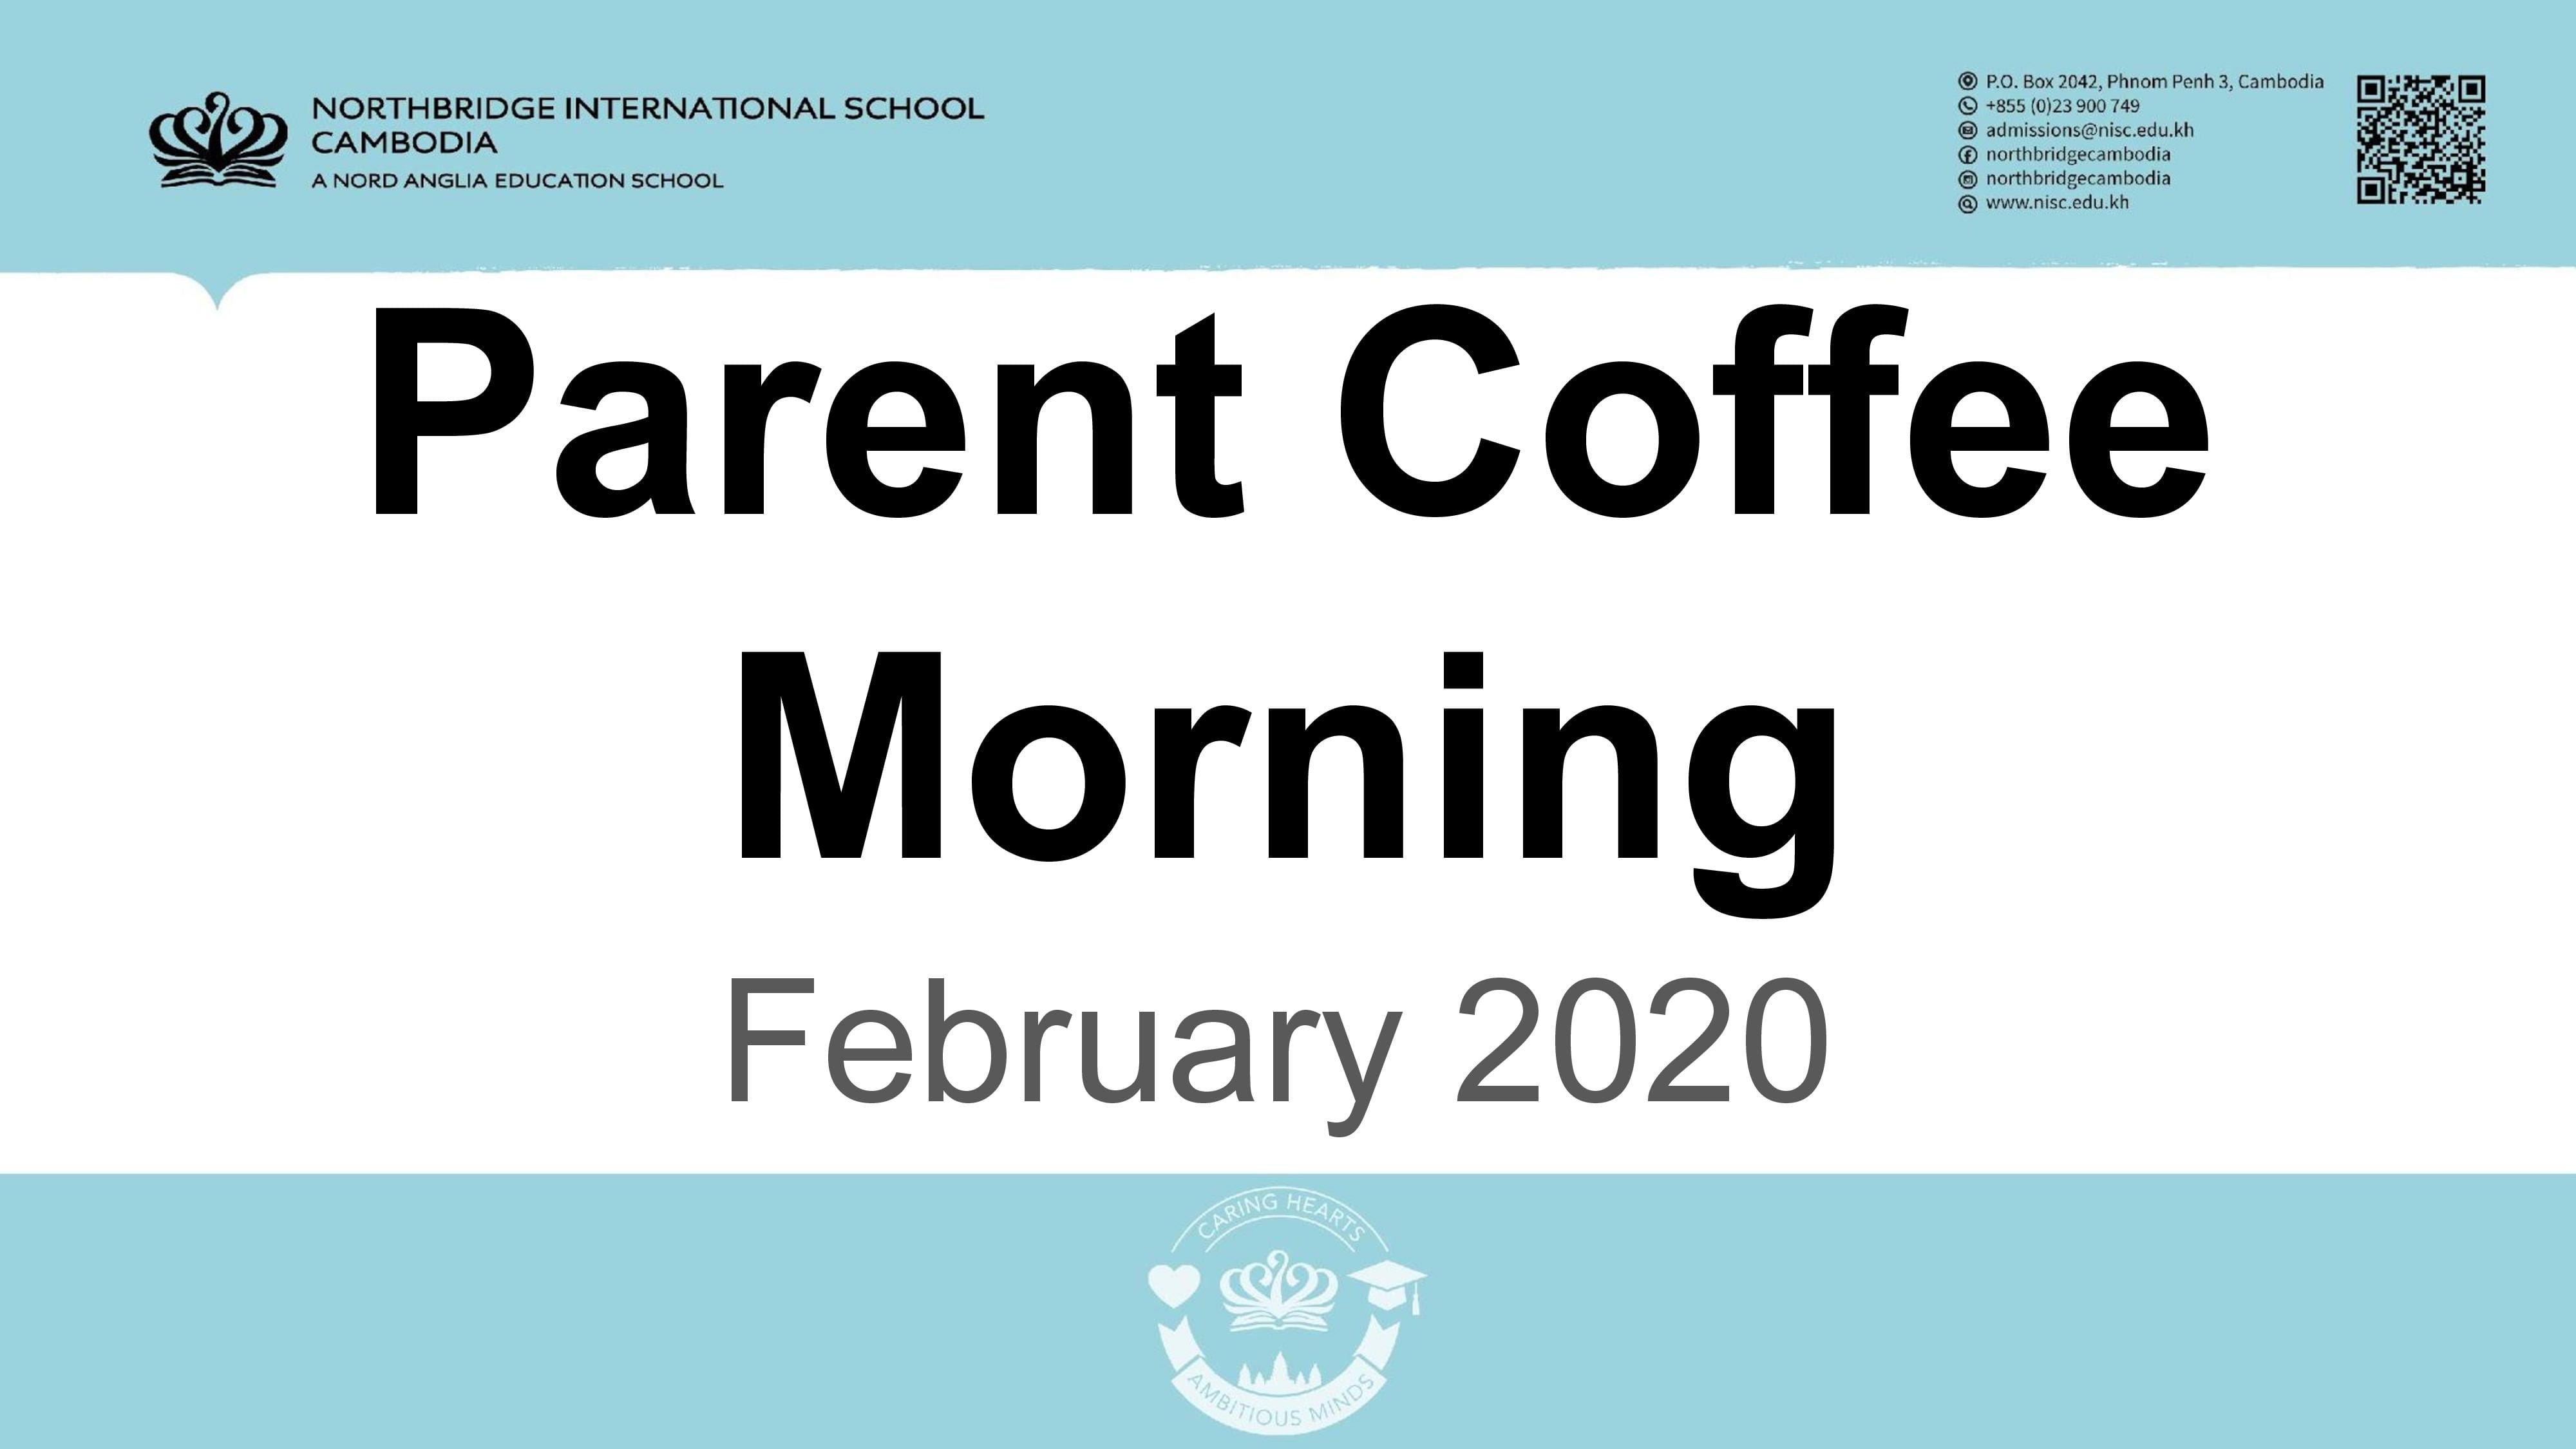 Highlights from the Northbridge Parent Coffee Morning held on Friday 14 February-highlights-from-the-northbridge-parent-coffee-morning-held-on-friday-14-february-Parent Coffee Morning February 2020page001